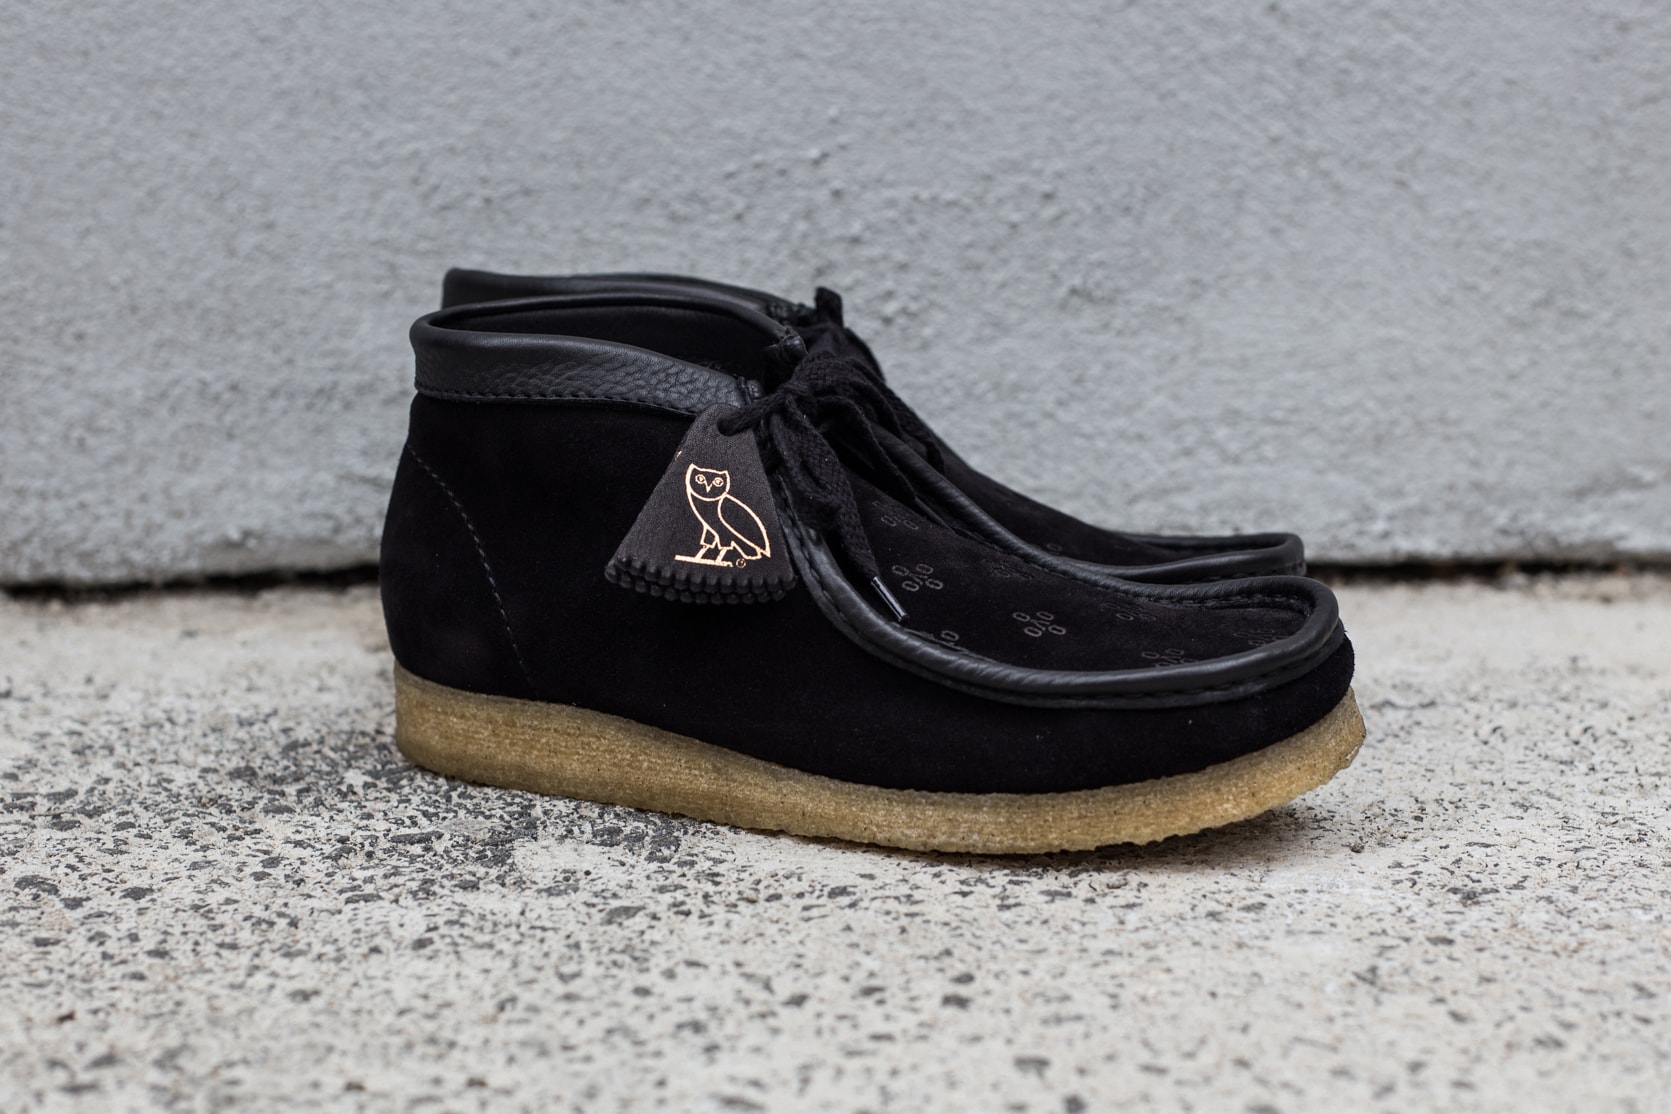 Drake OVO Clarks Wallabee Closer Look Collaboration For Sale Availability Pricing Release Info Desert Boots Date Hat Sweatshirt